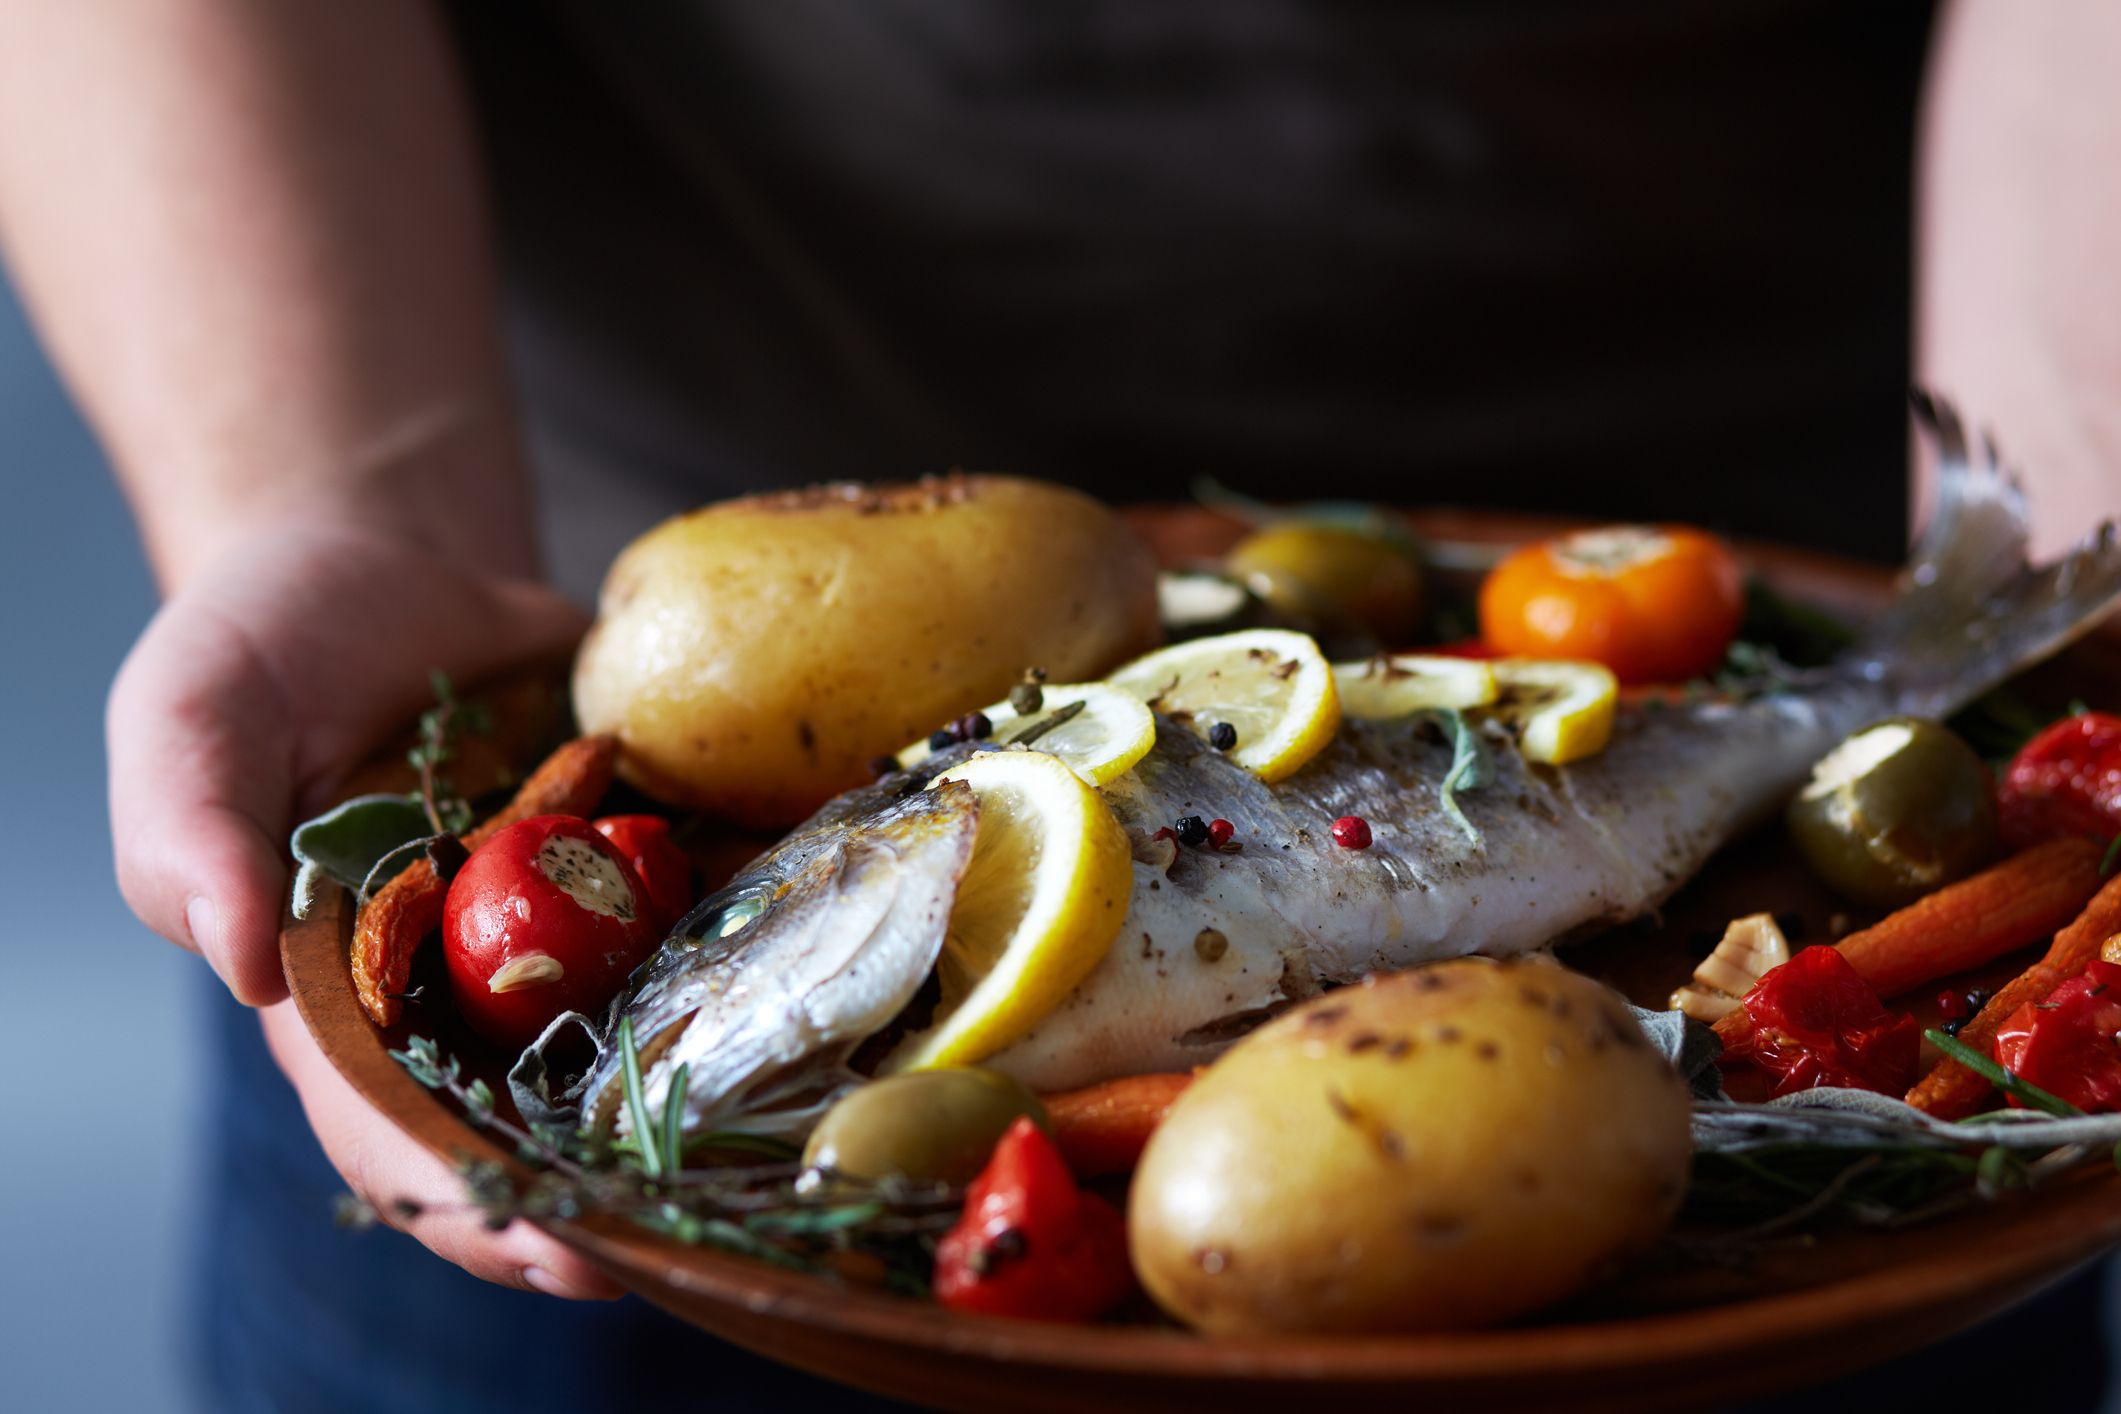 Why Doctors Recommend The Mediterranean Diet